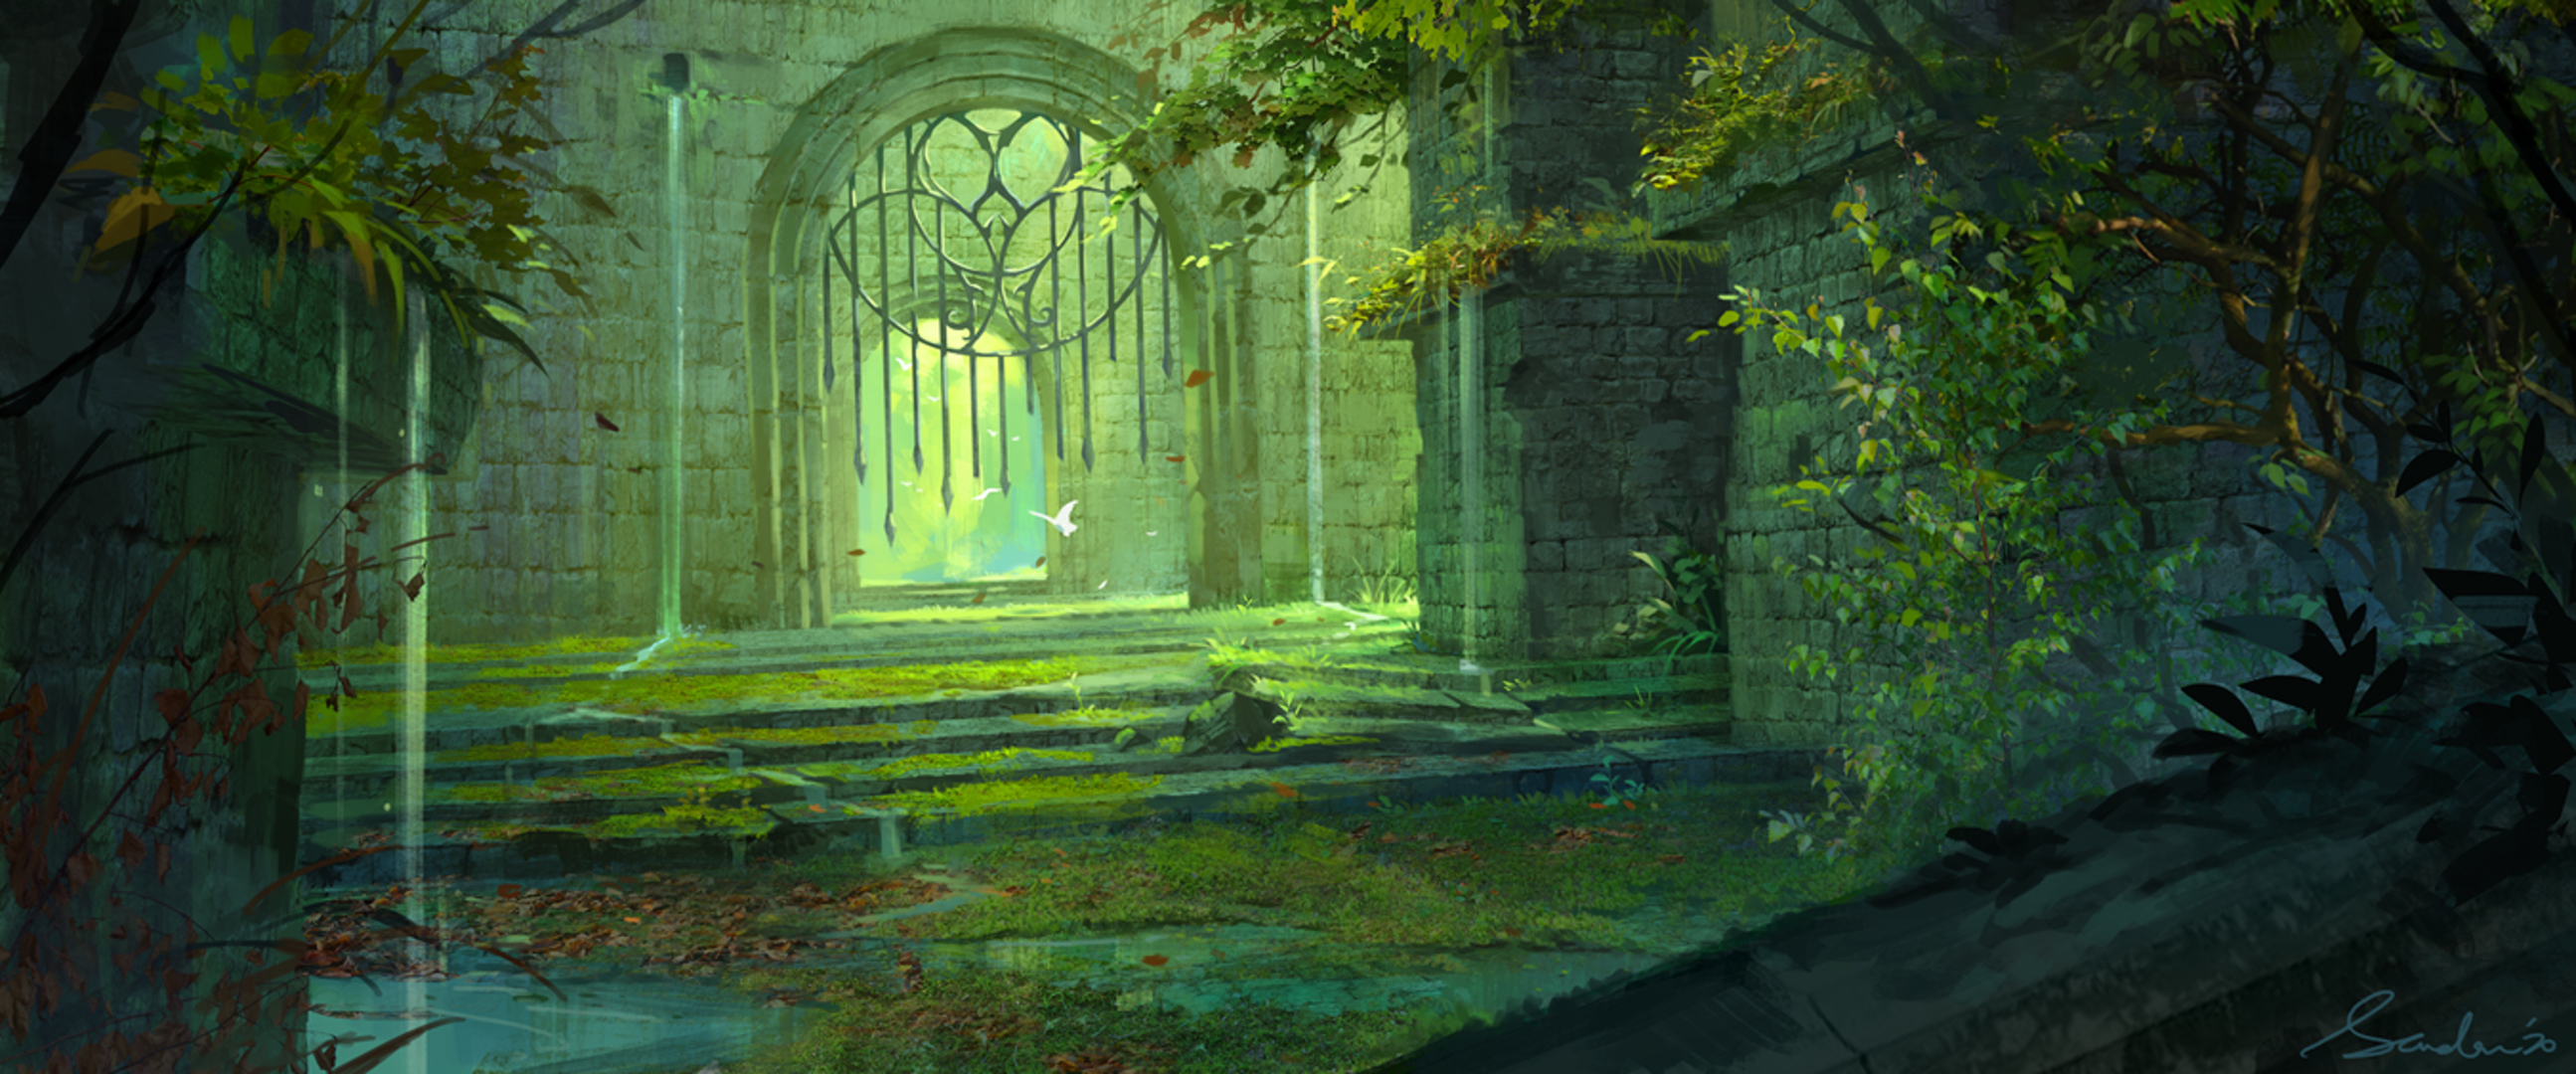 Forgotten temple in the jungle by sandara